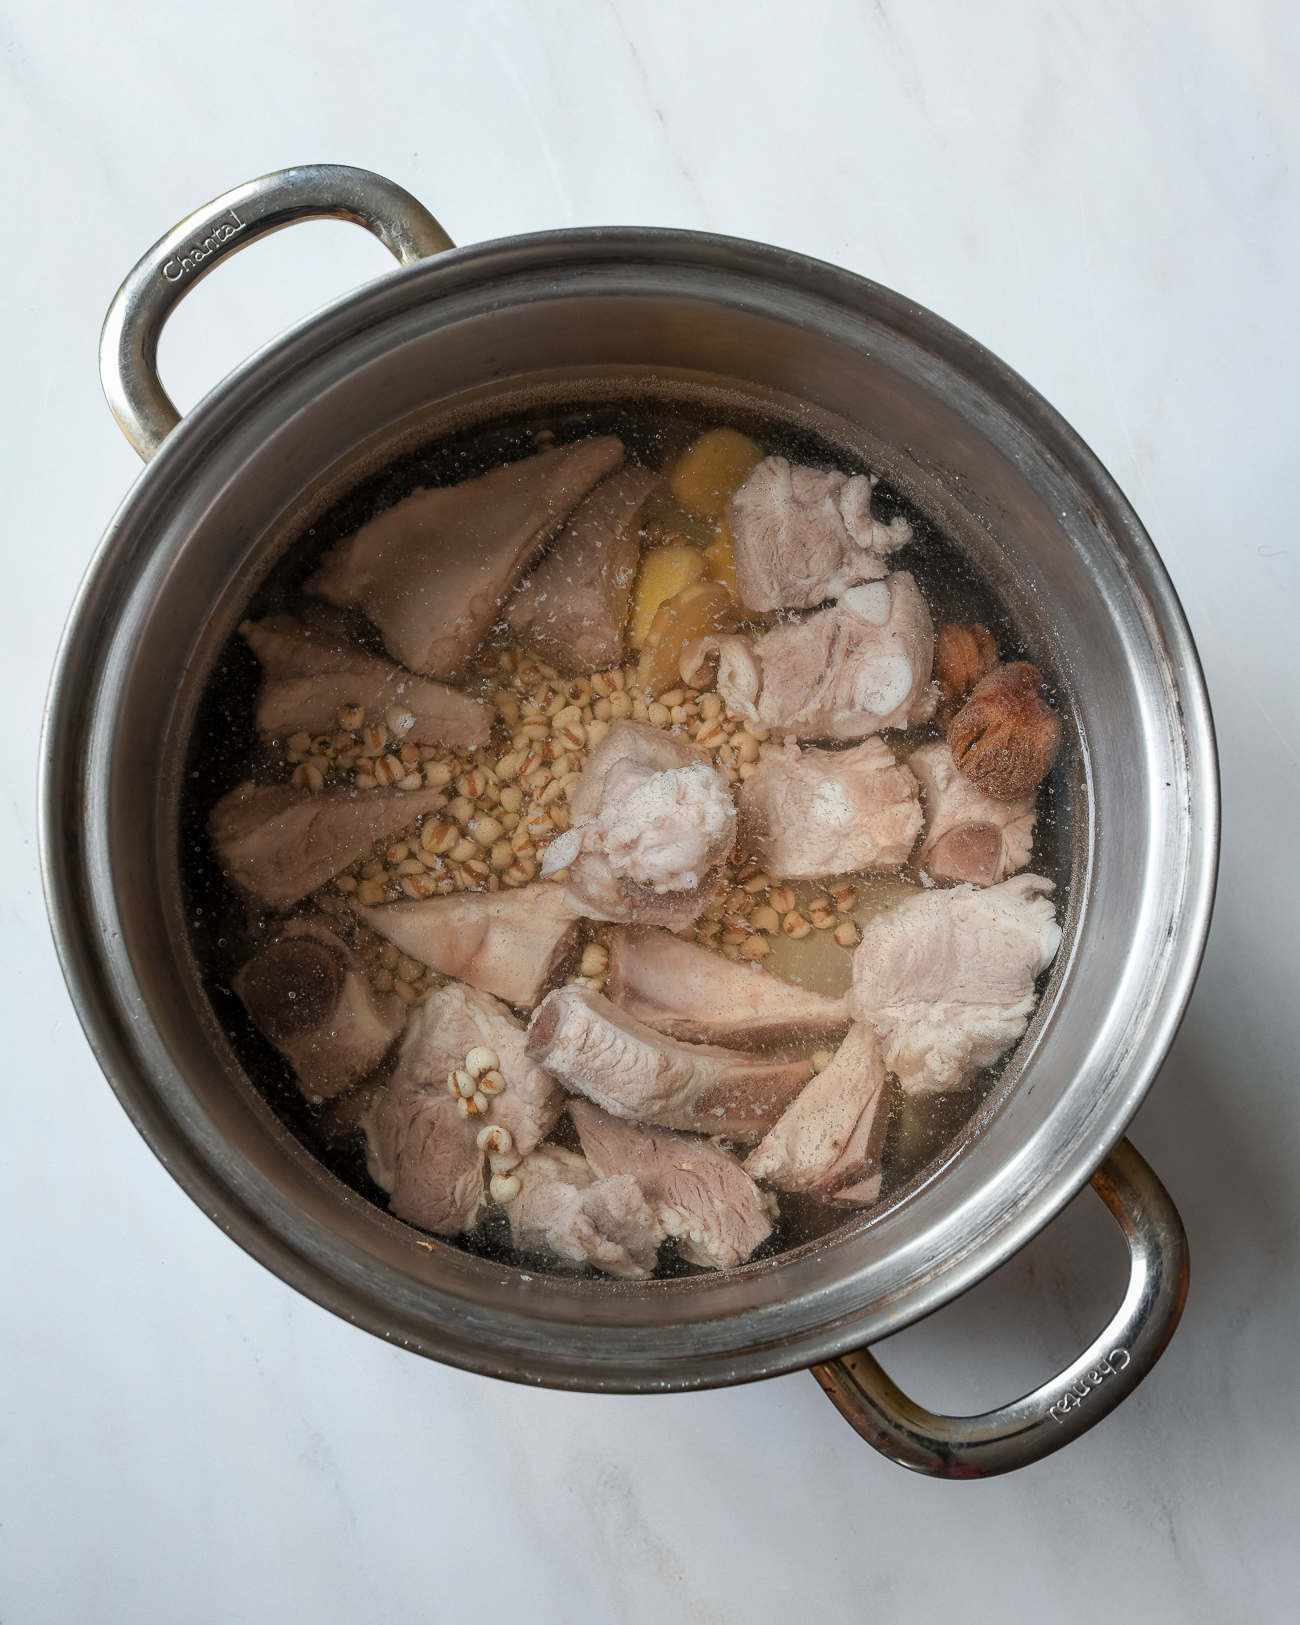 Blanched pork bones with barley, ginger, and dates in soup pot